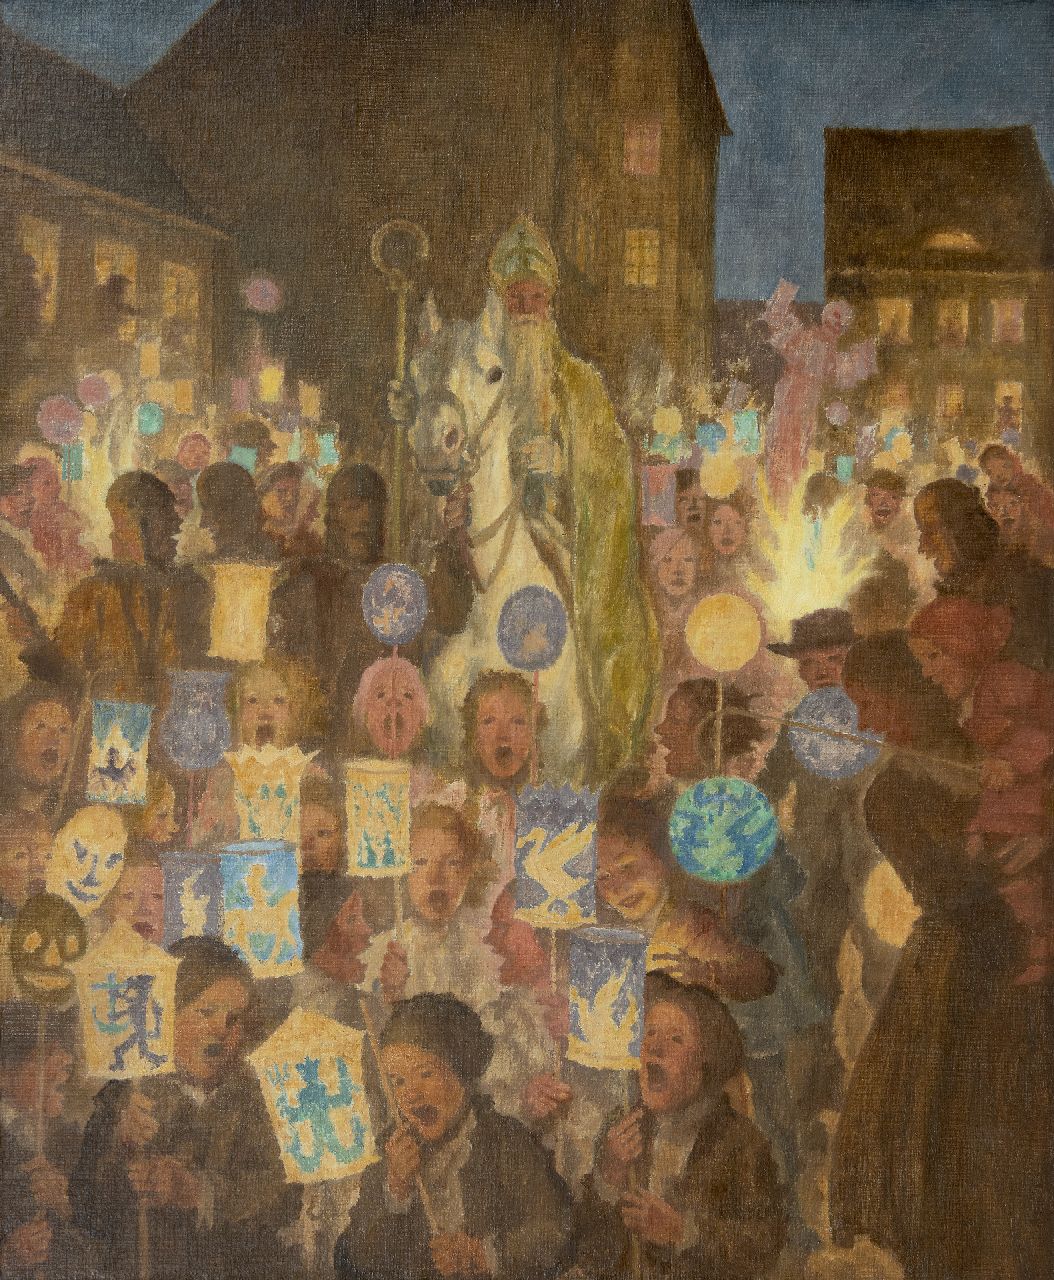 Münzer A.F.T.  | Adolph Franz Theodor 'Adolf' Münzer | Paintings offered for sale | Saint Martin procession 1934, oil on canvas 80.8 x 66.0 cm, signed on the reverse and dated on the reverse 1934